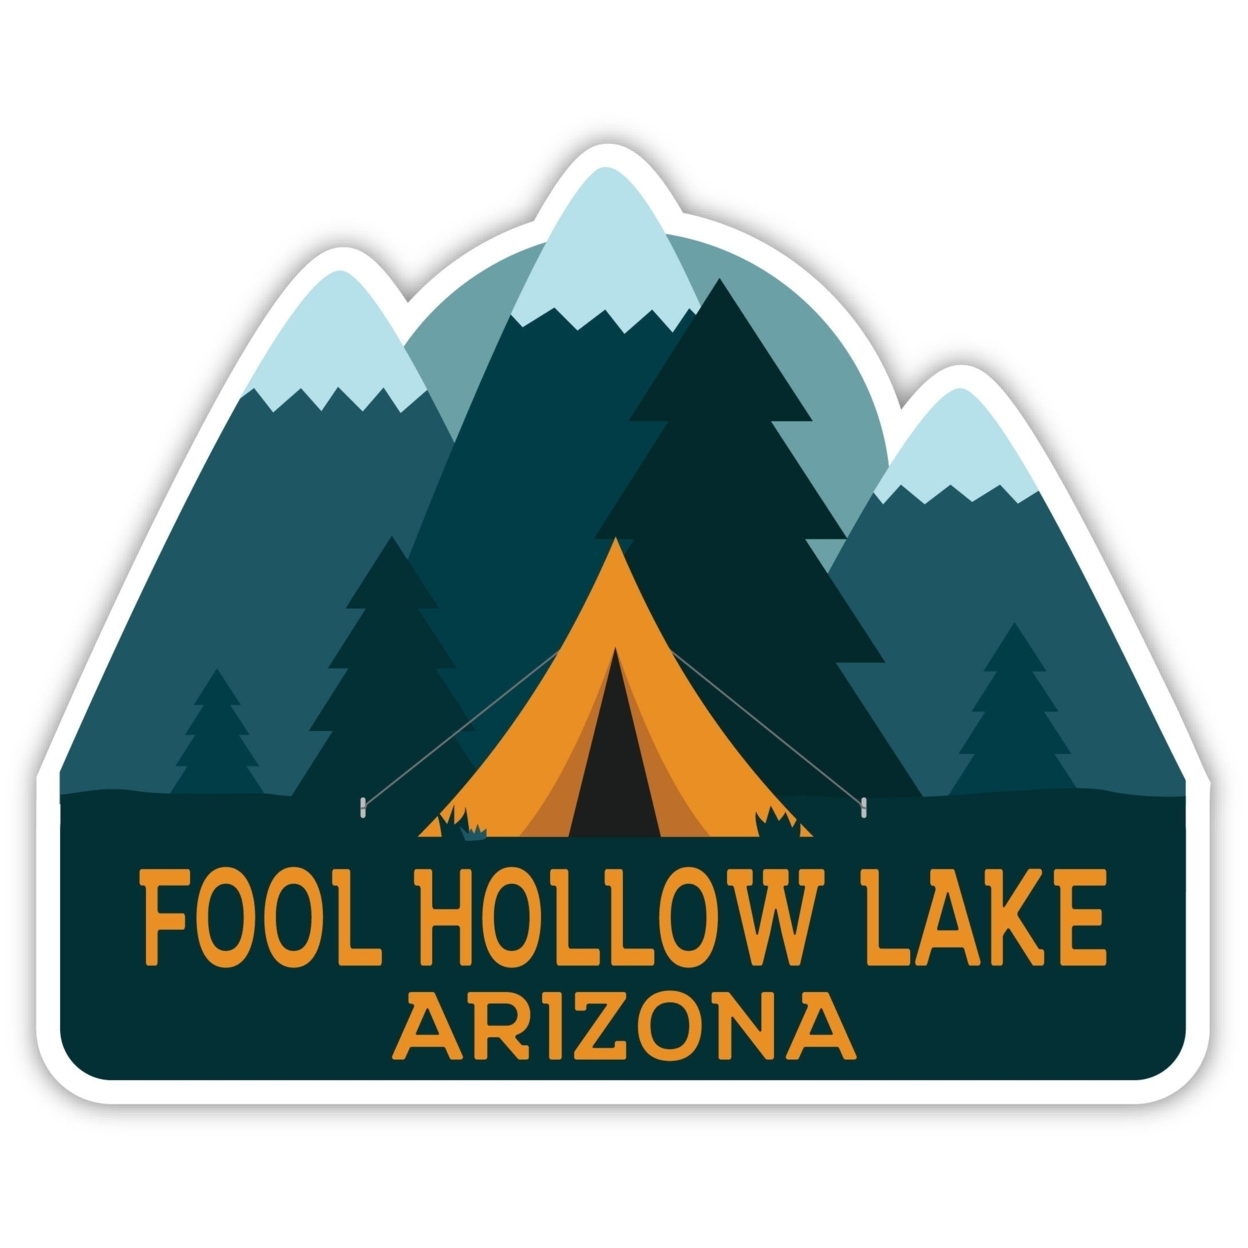 Fool Hollow Lake Arizona Souvenir Decorative Stickers (Choose Theme And Size) - Single Unit, 10-Inch, Great Outdoors